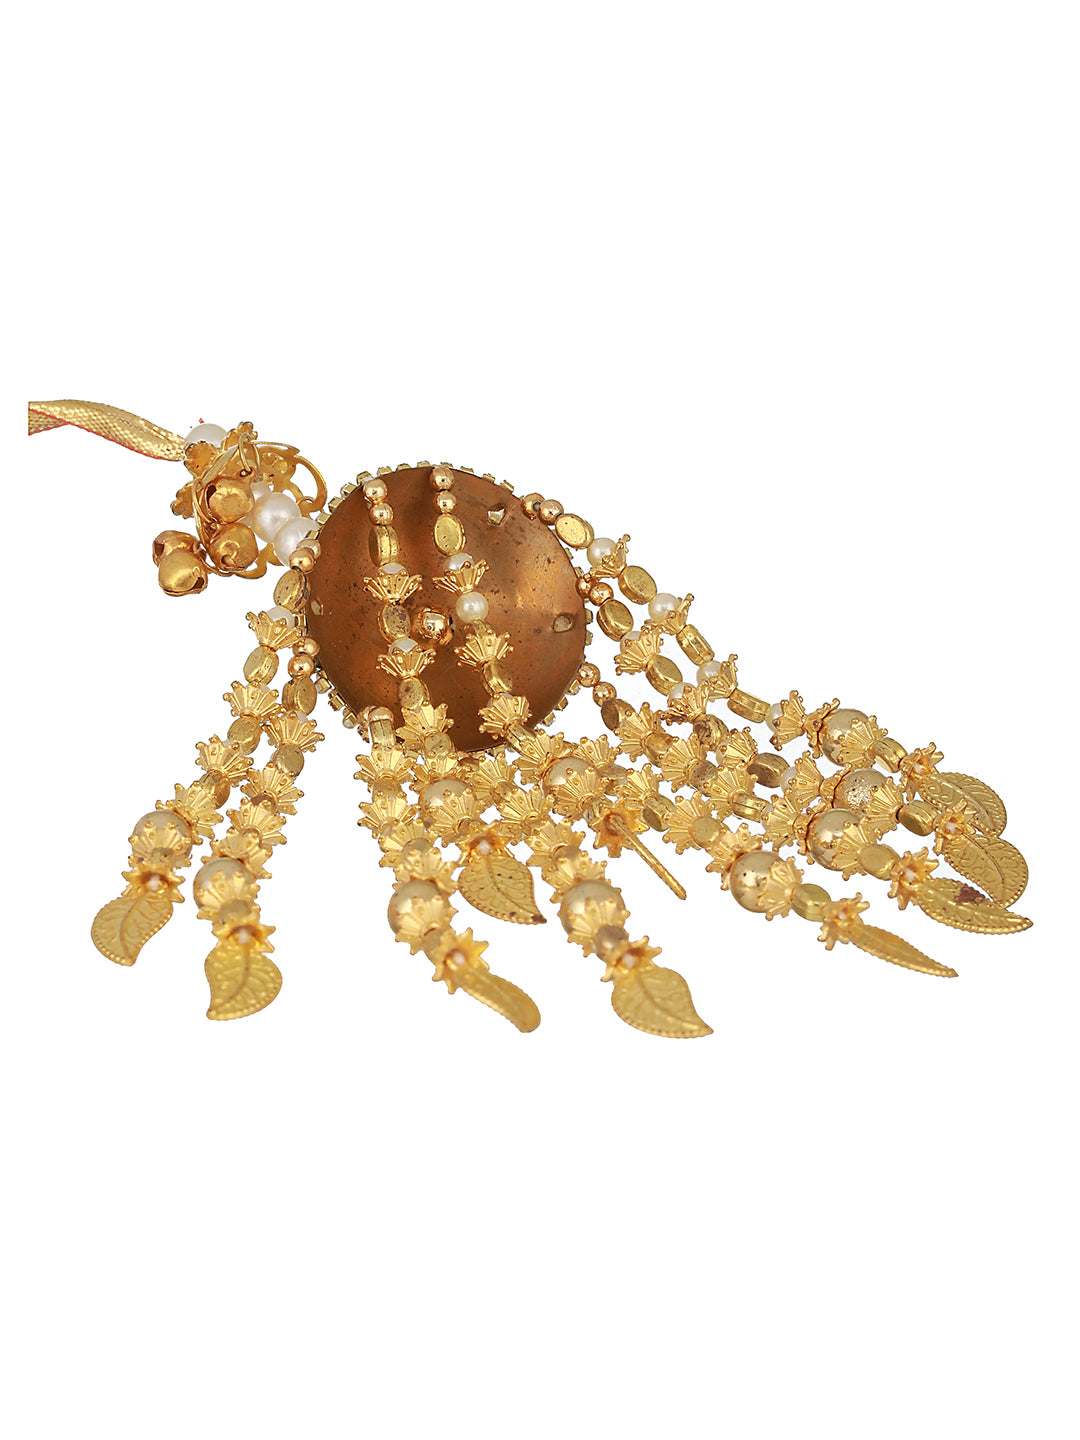 Set of 2 Gold-Plated Stone-Studded & Beaded Kaleera Secured with drawstring closure.